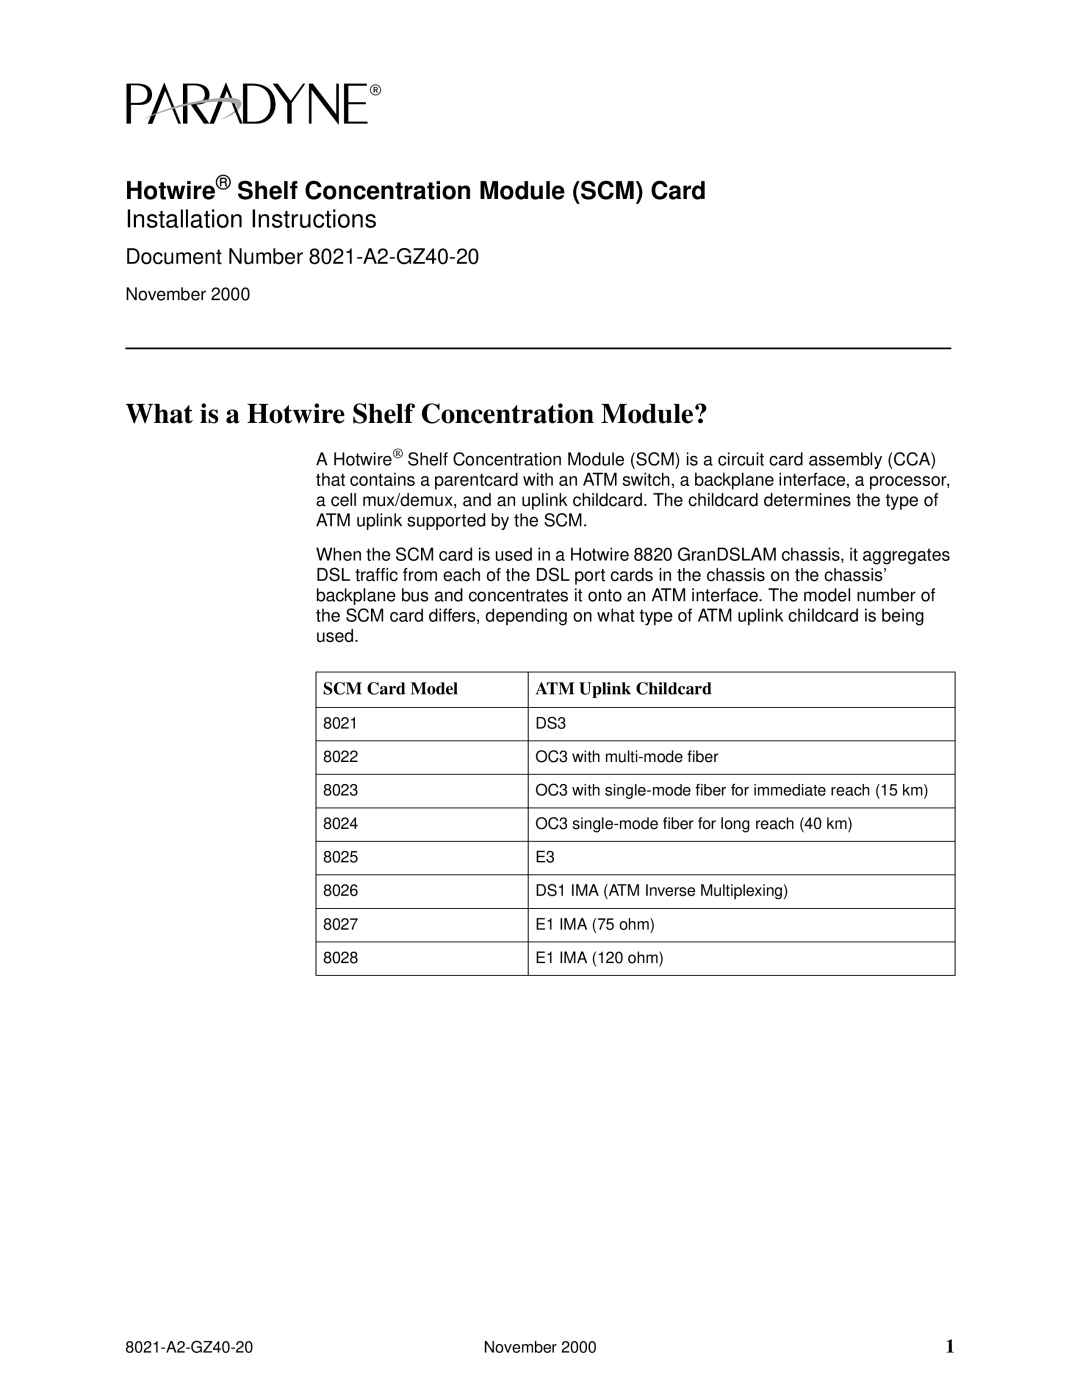 Paradyne 8021, 8022, 8023, 8026, 8024 installation instructions What is a Hotwire Shelf Concentration Module?, SCM Card Model 